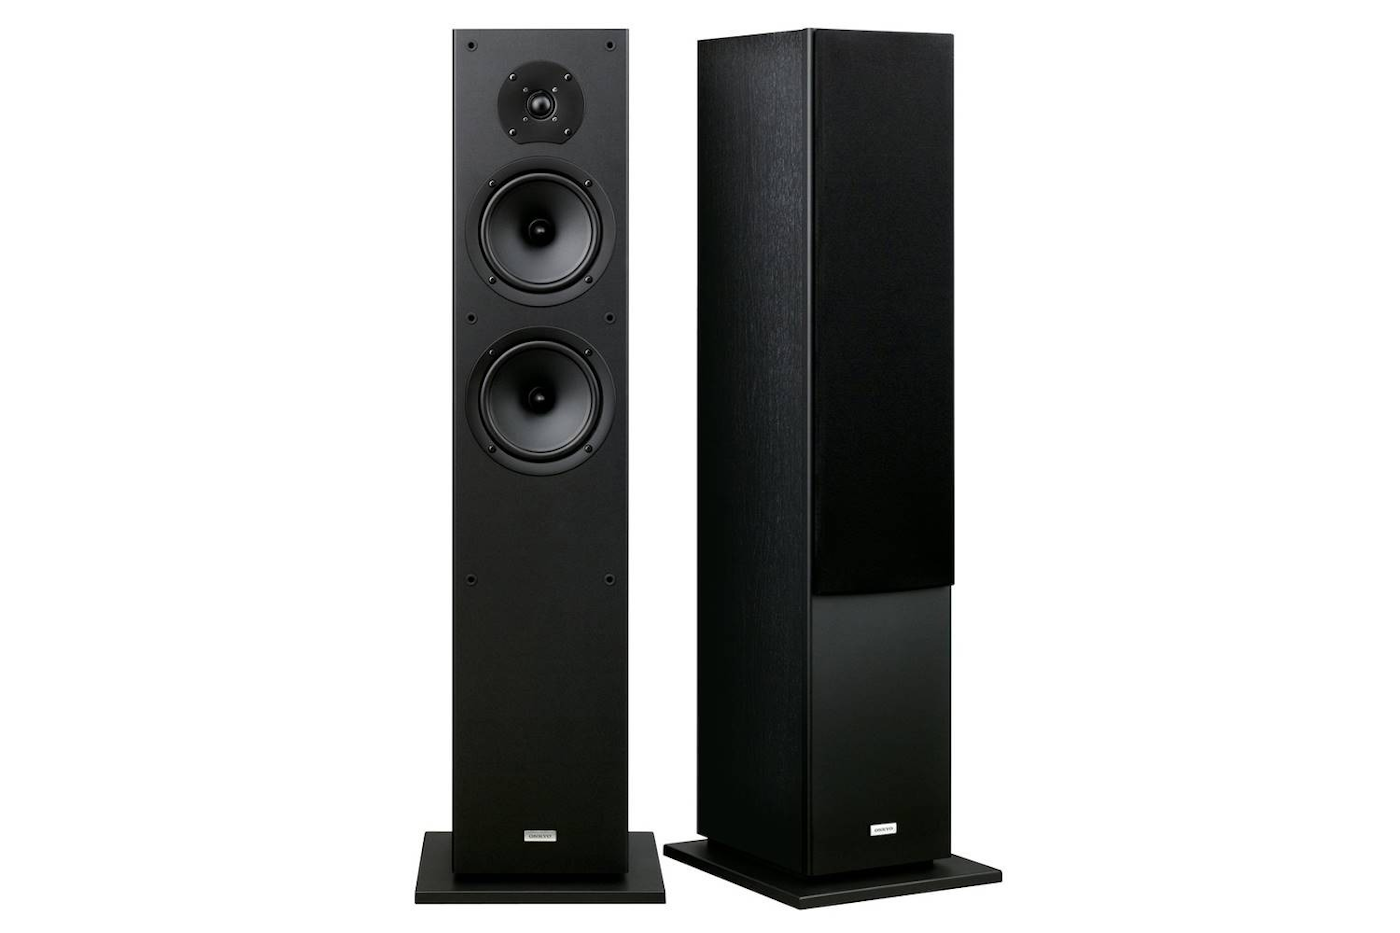 onkyo skf-4800 floorstanding speakers with and without grille